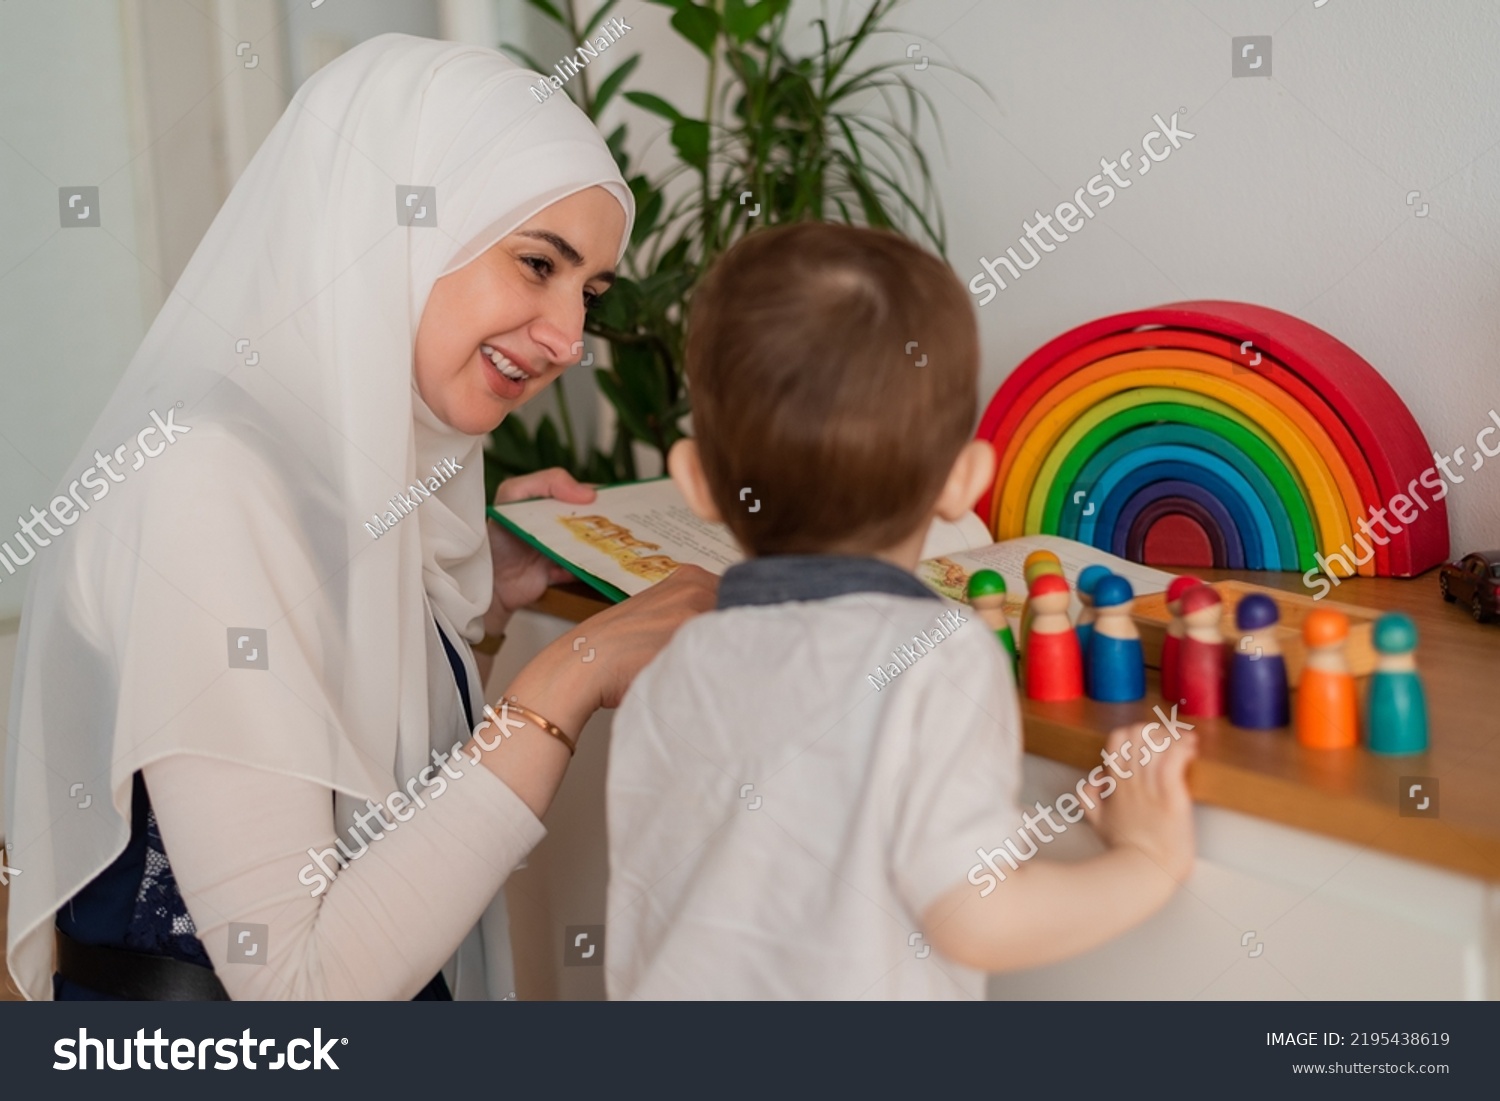 A Musllim teacher and preschool child playing together with colorful toys in the Montessori school classroom or kindergarten. #2195438619